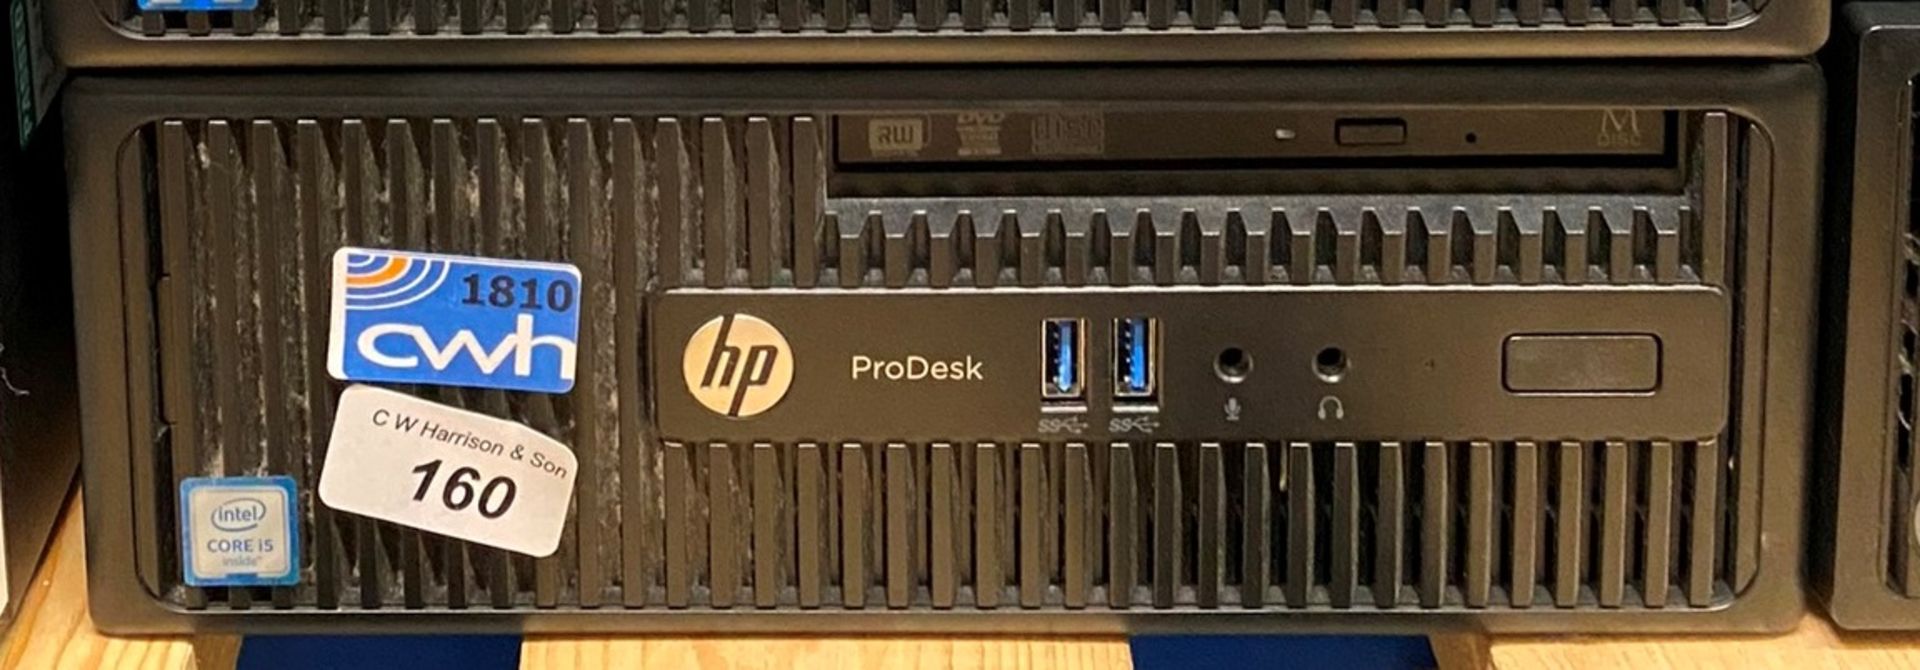 HP ProDesk 400 intel Core i5 Desktop Computer - 8GB RAM and 1TB Hard Drive - With Power Lead